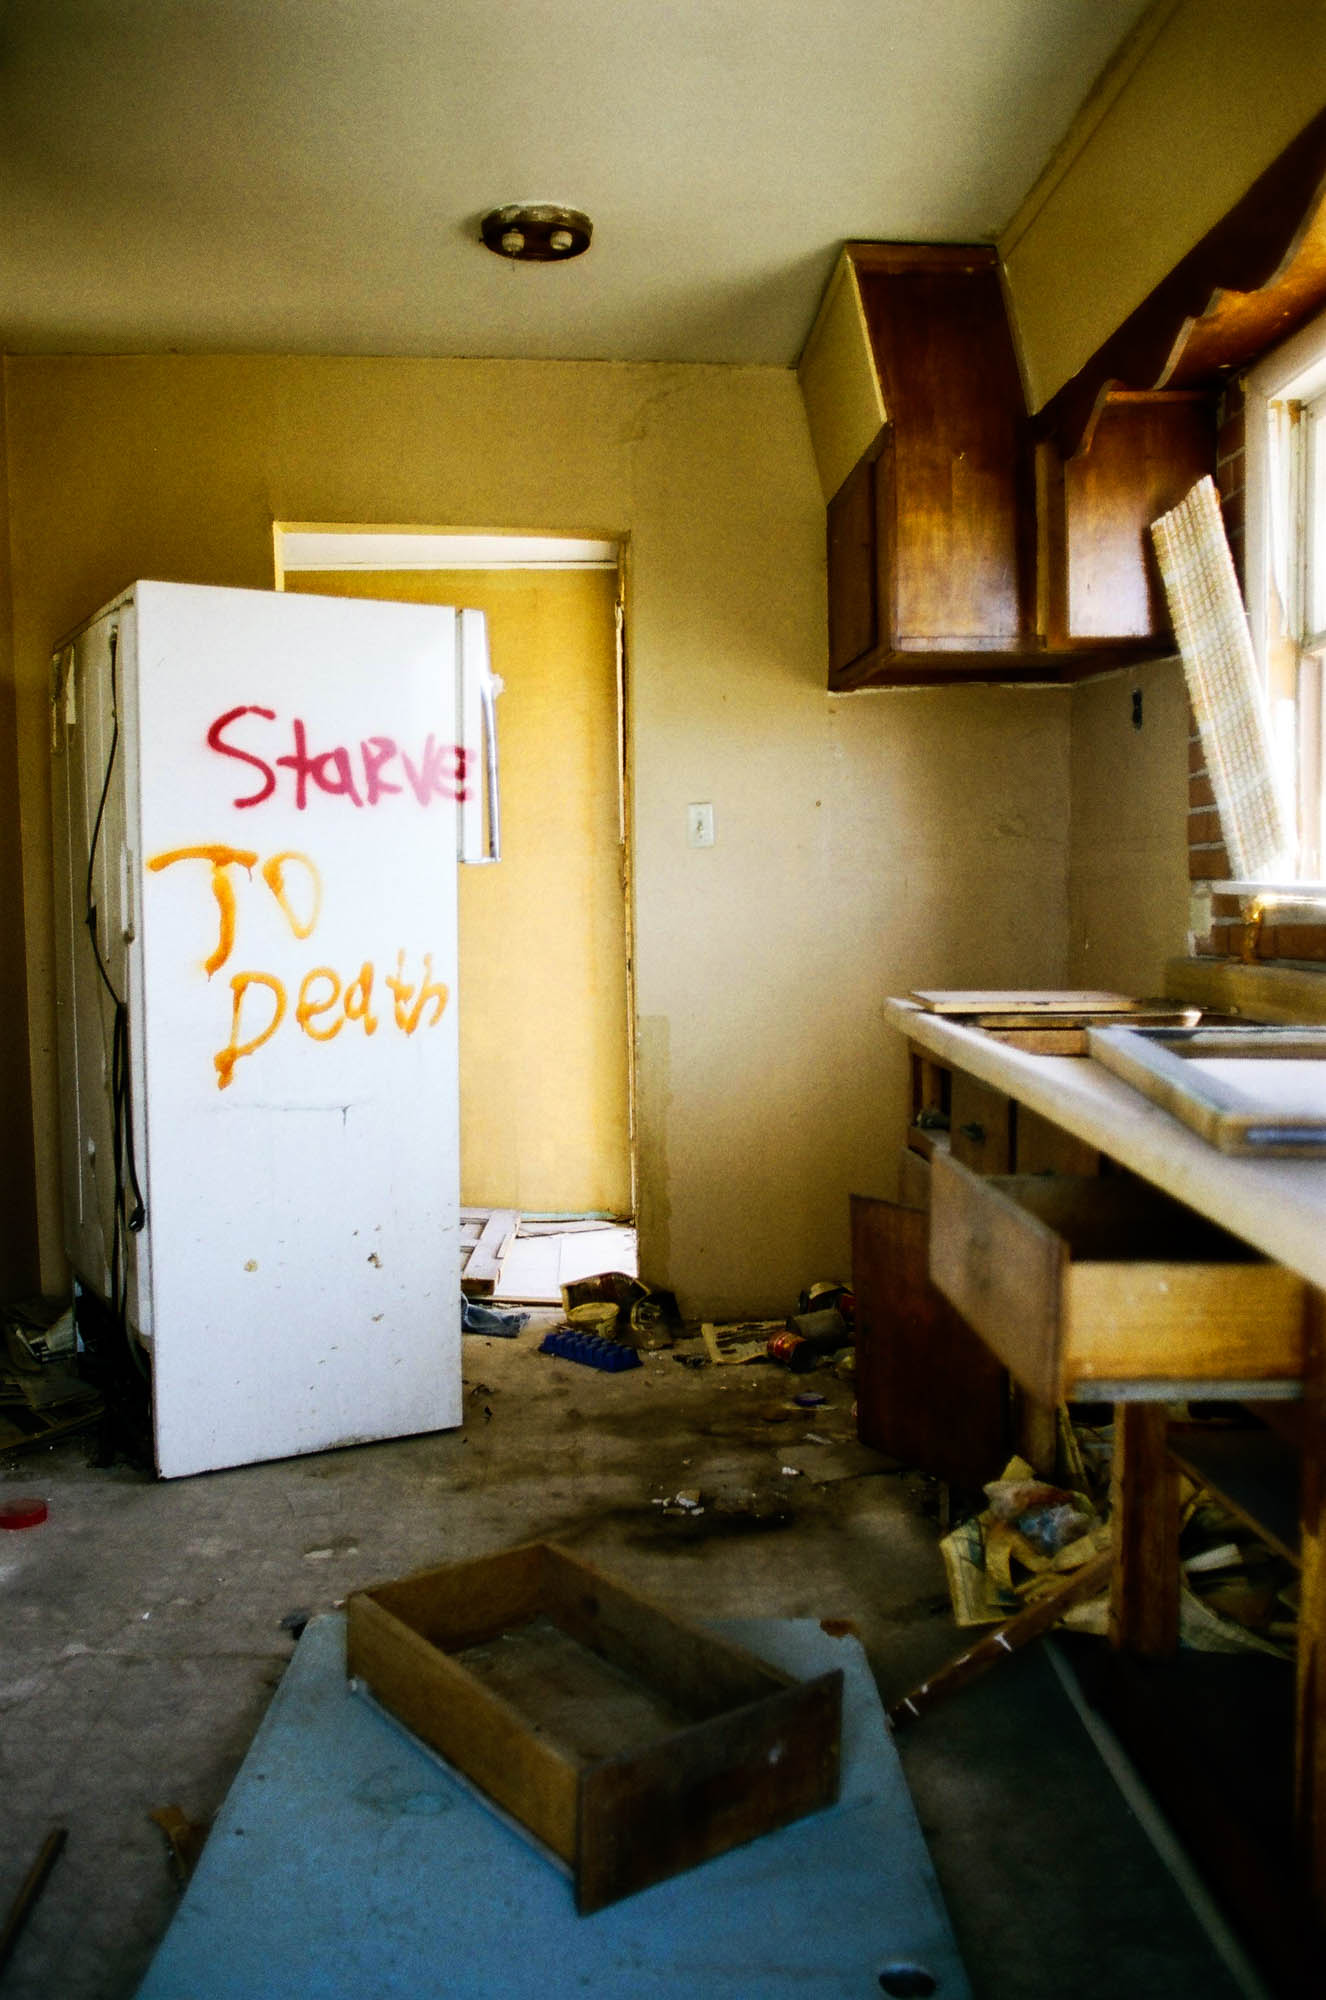 <a href="http://www.jasonhousefilm.com/photography/ghost-towns/">"Soon to be Ghost Towns" series, 2010</a>